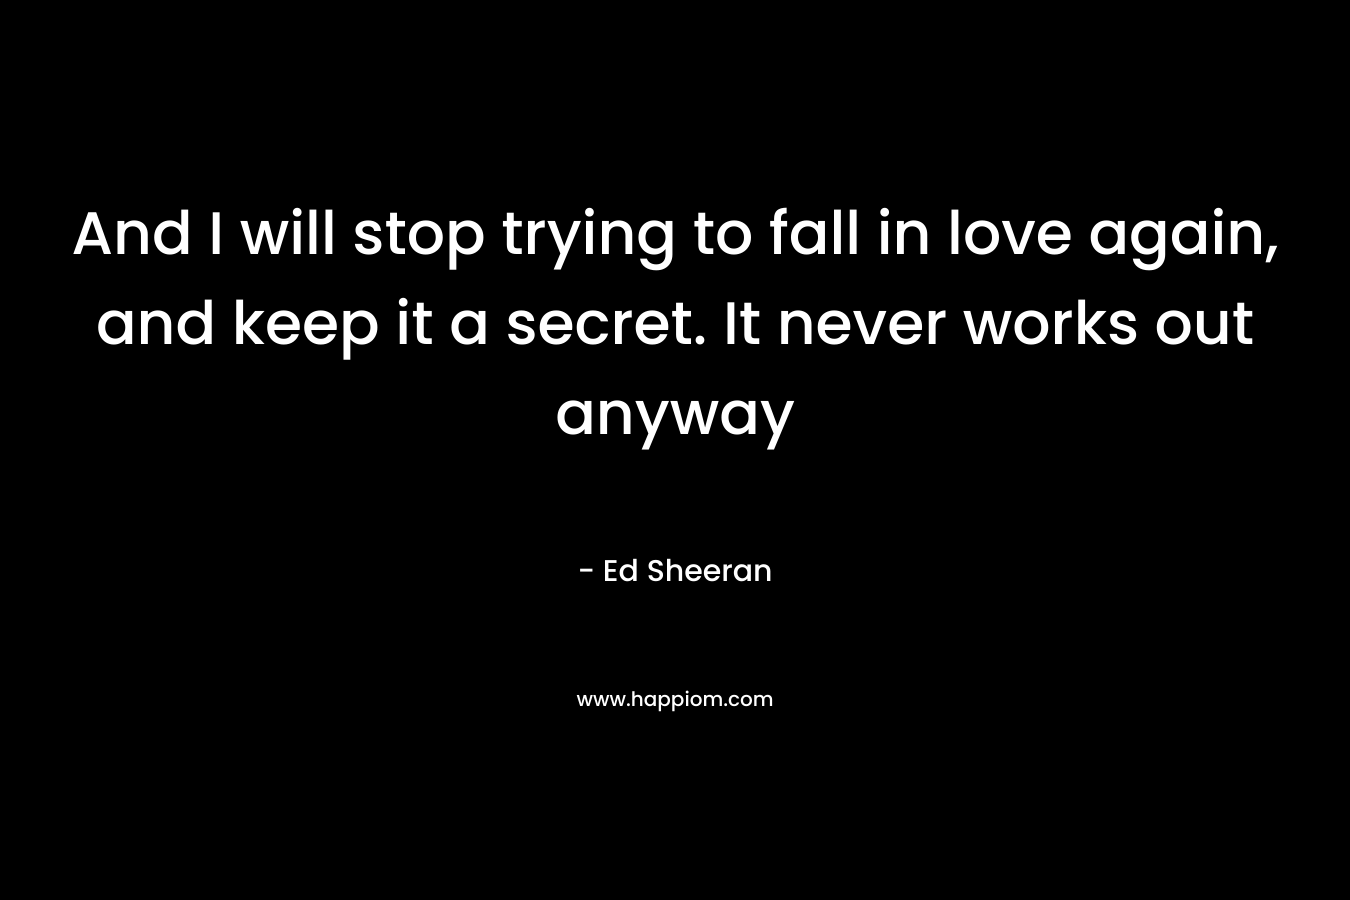 And I will stop trying to fall in love again, and keep it a secret. It never works out anyway – Ed Sheeran